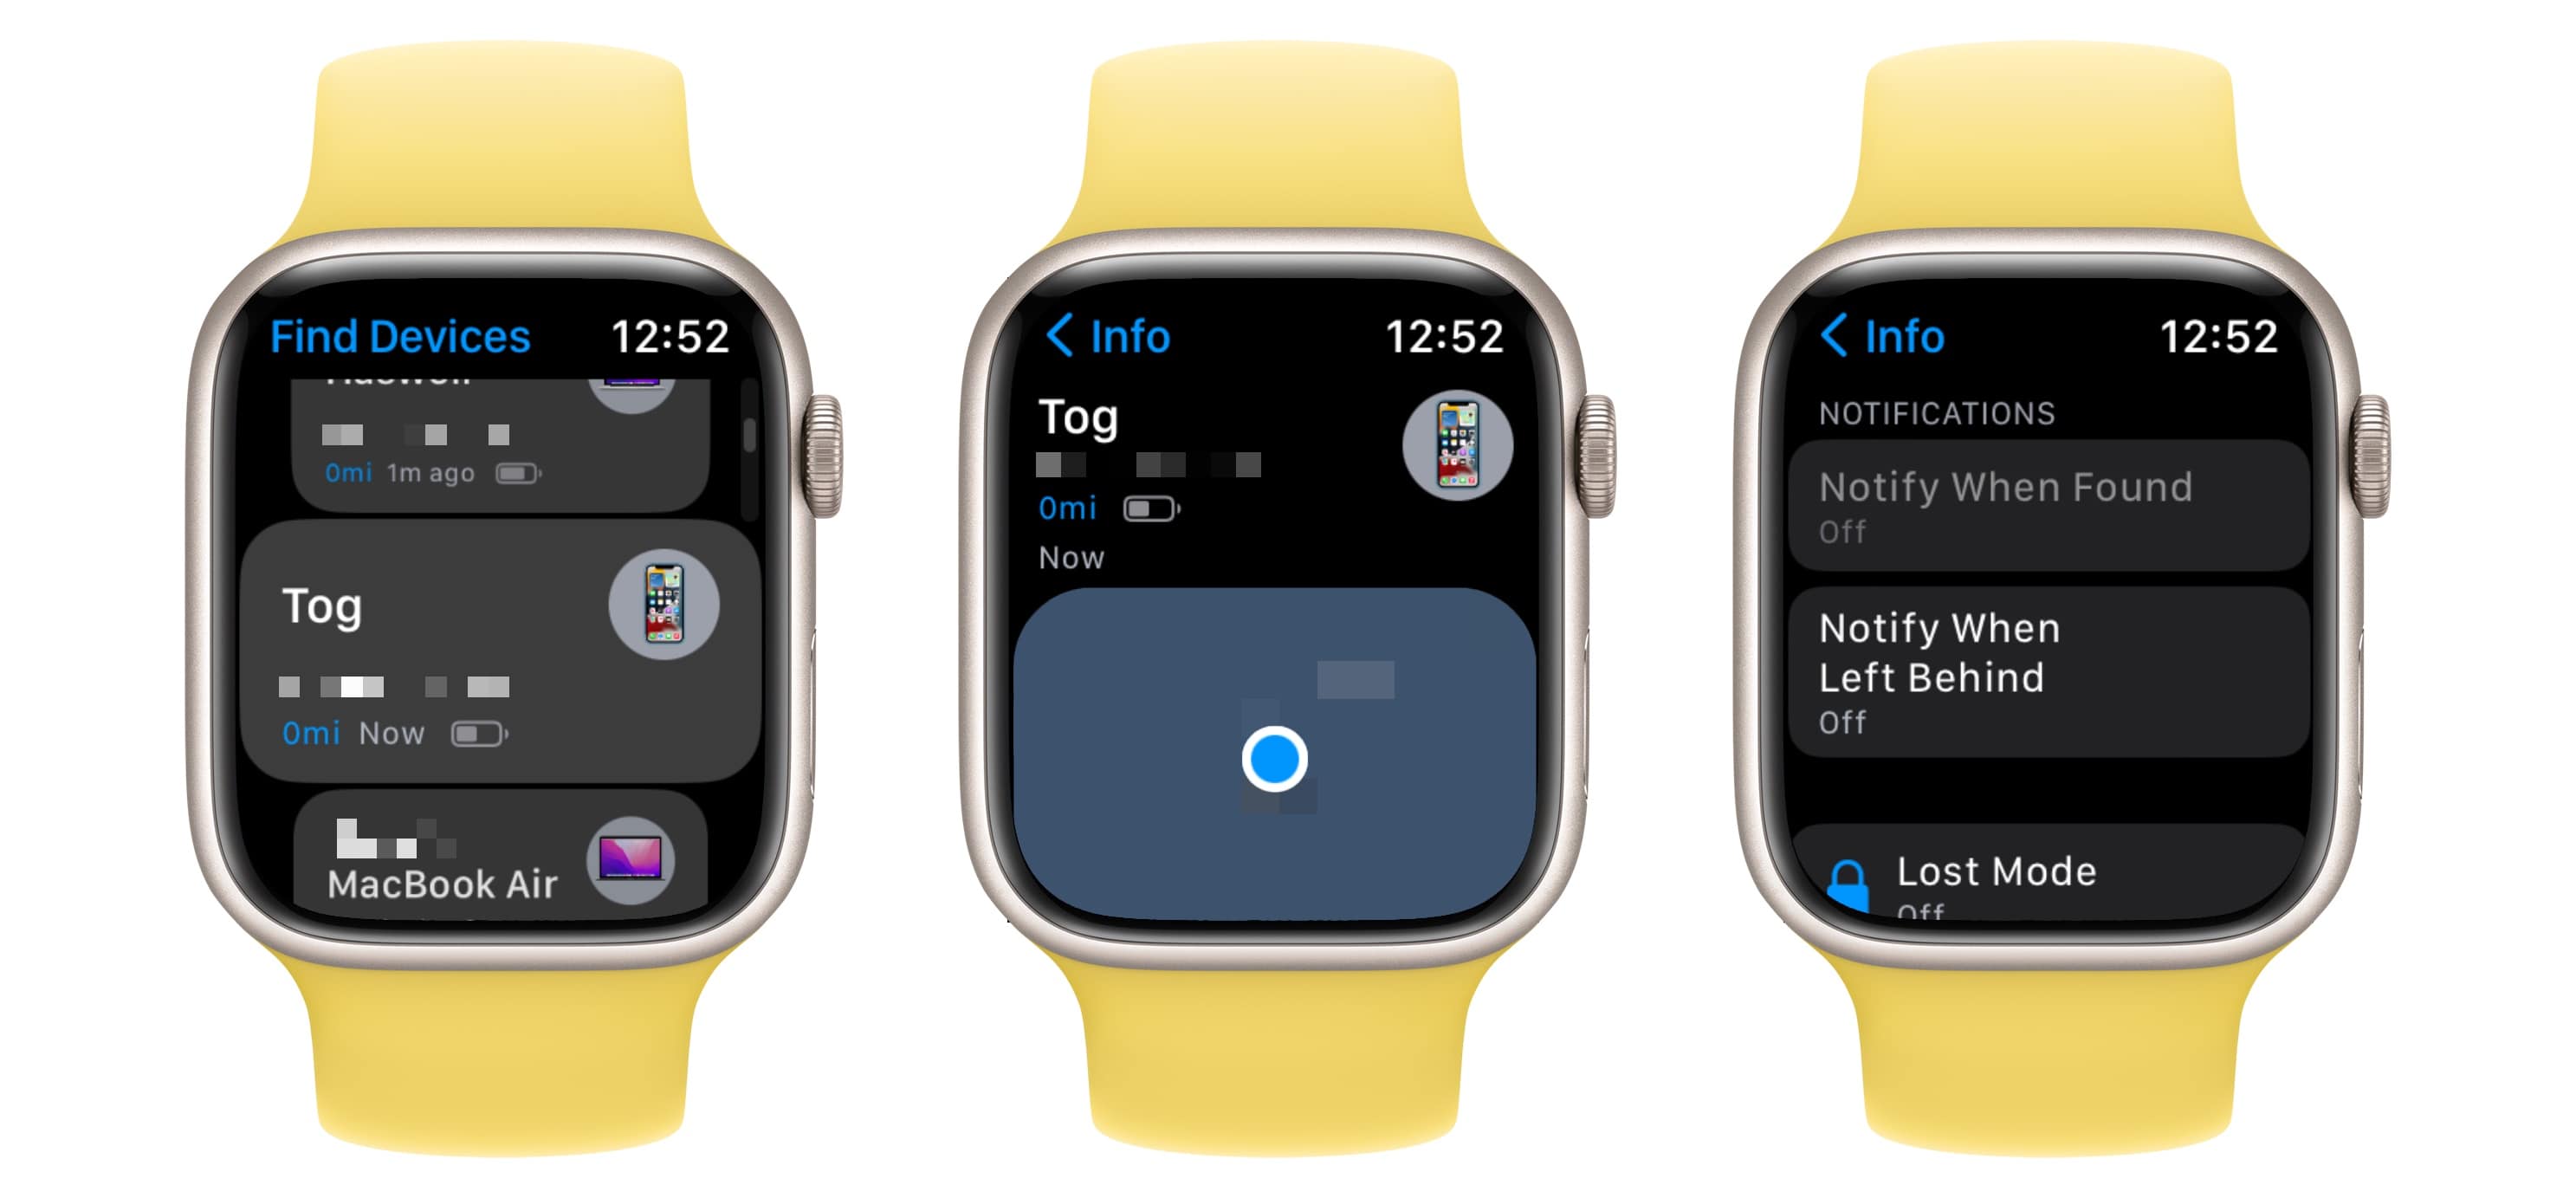 The Find Devices app on Apple Watch lets you locate lost Apple gear and get alerted, right from your Watch.